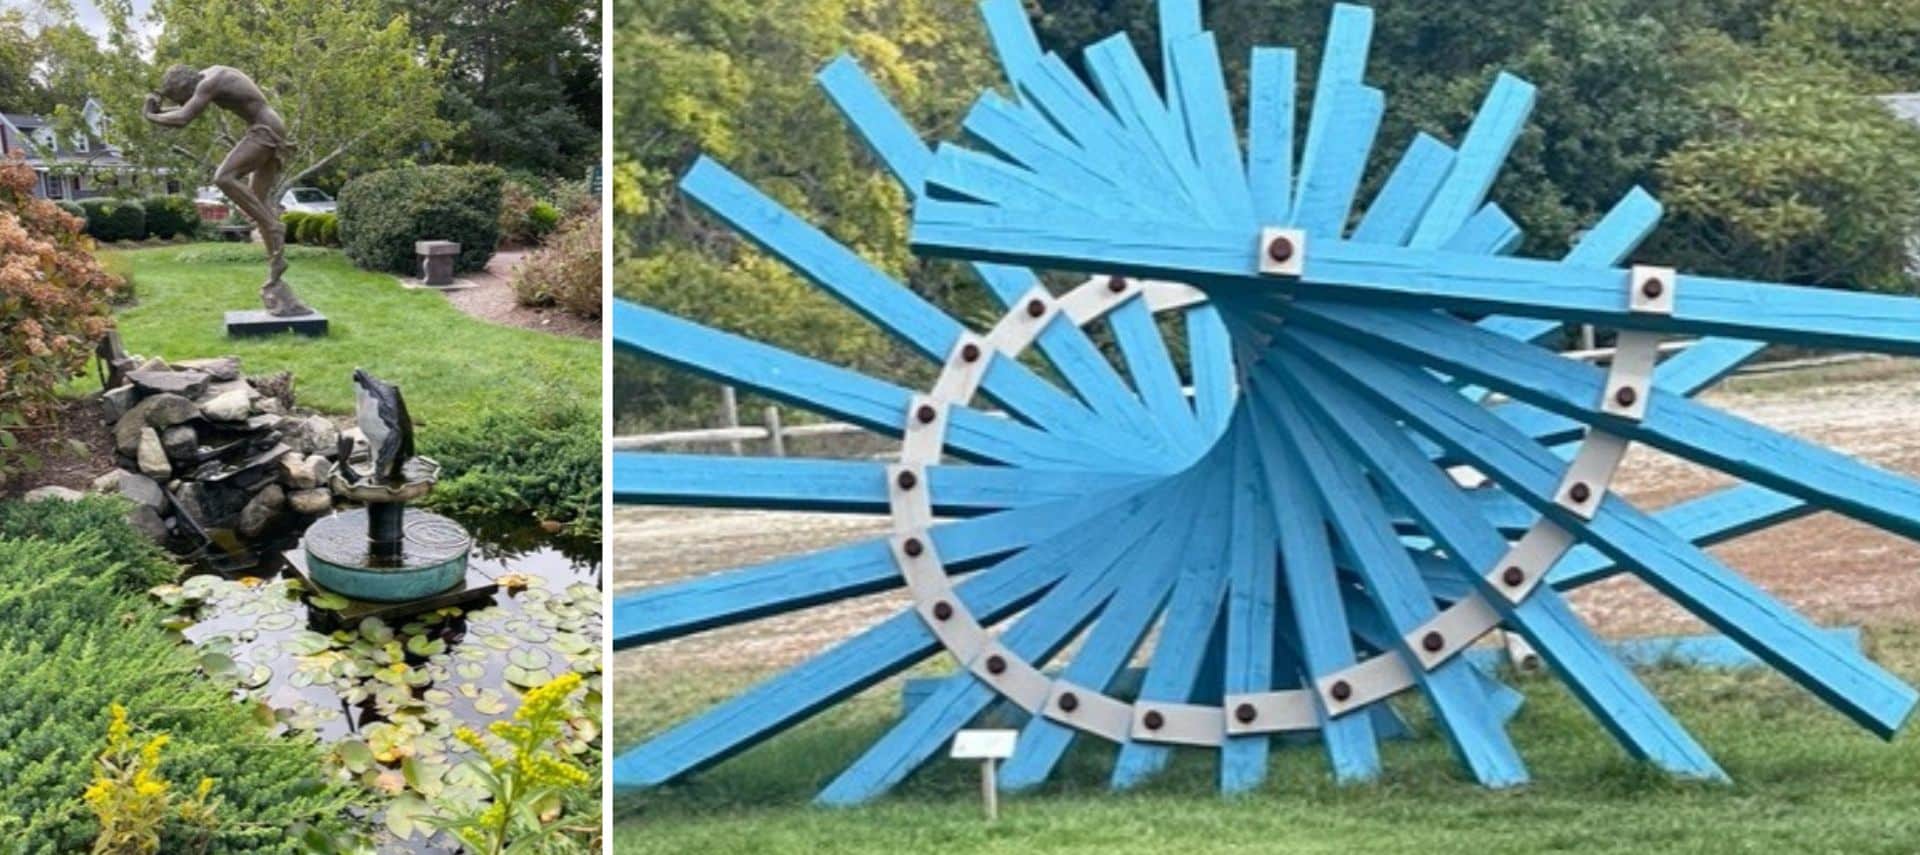 Outdoor garden and displays at the Cape Cod Museum of Art